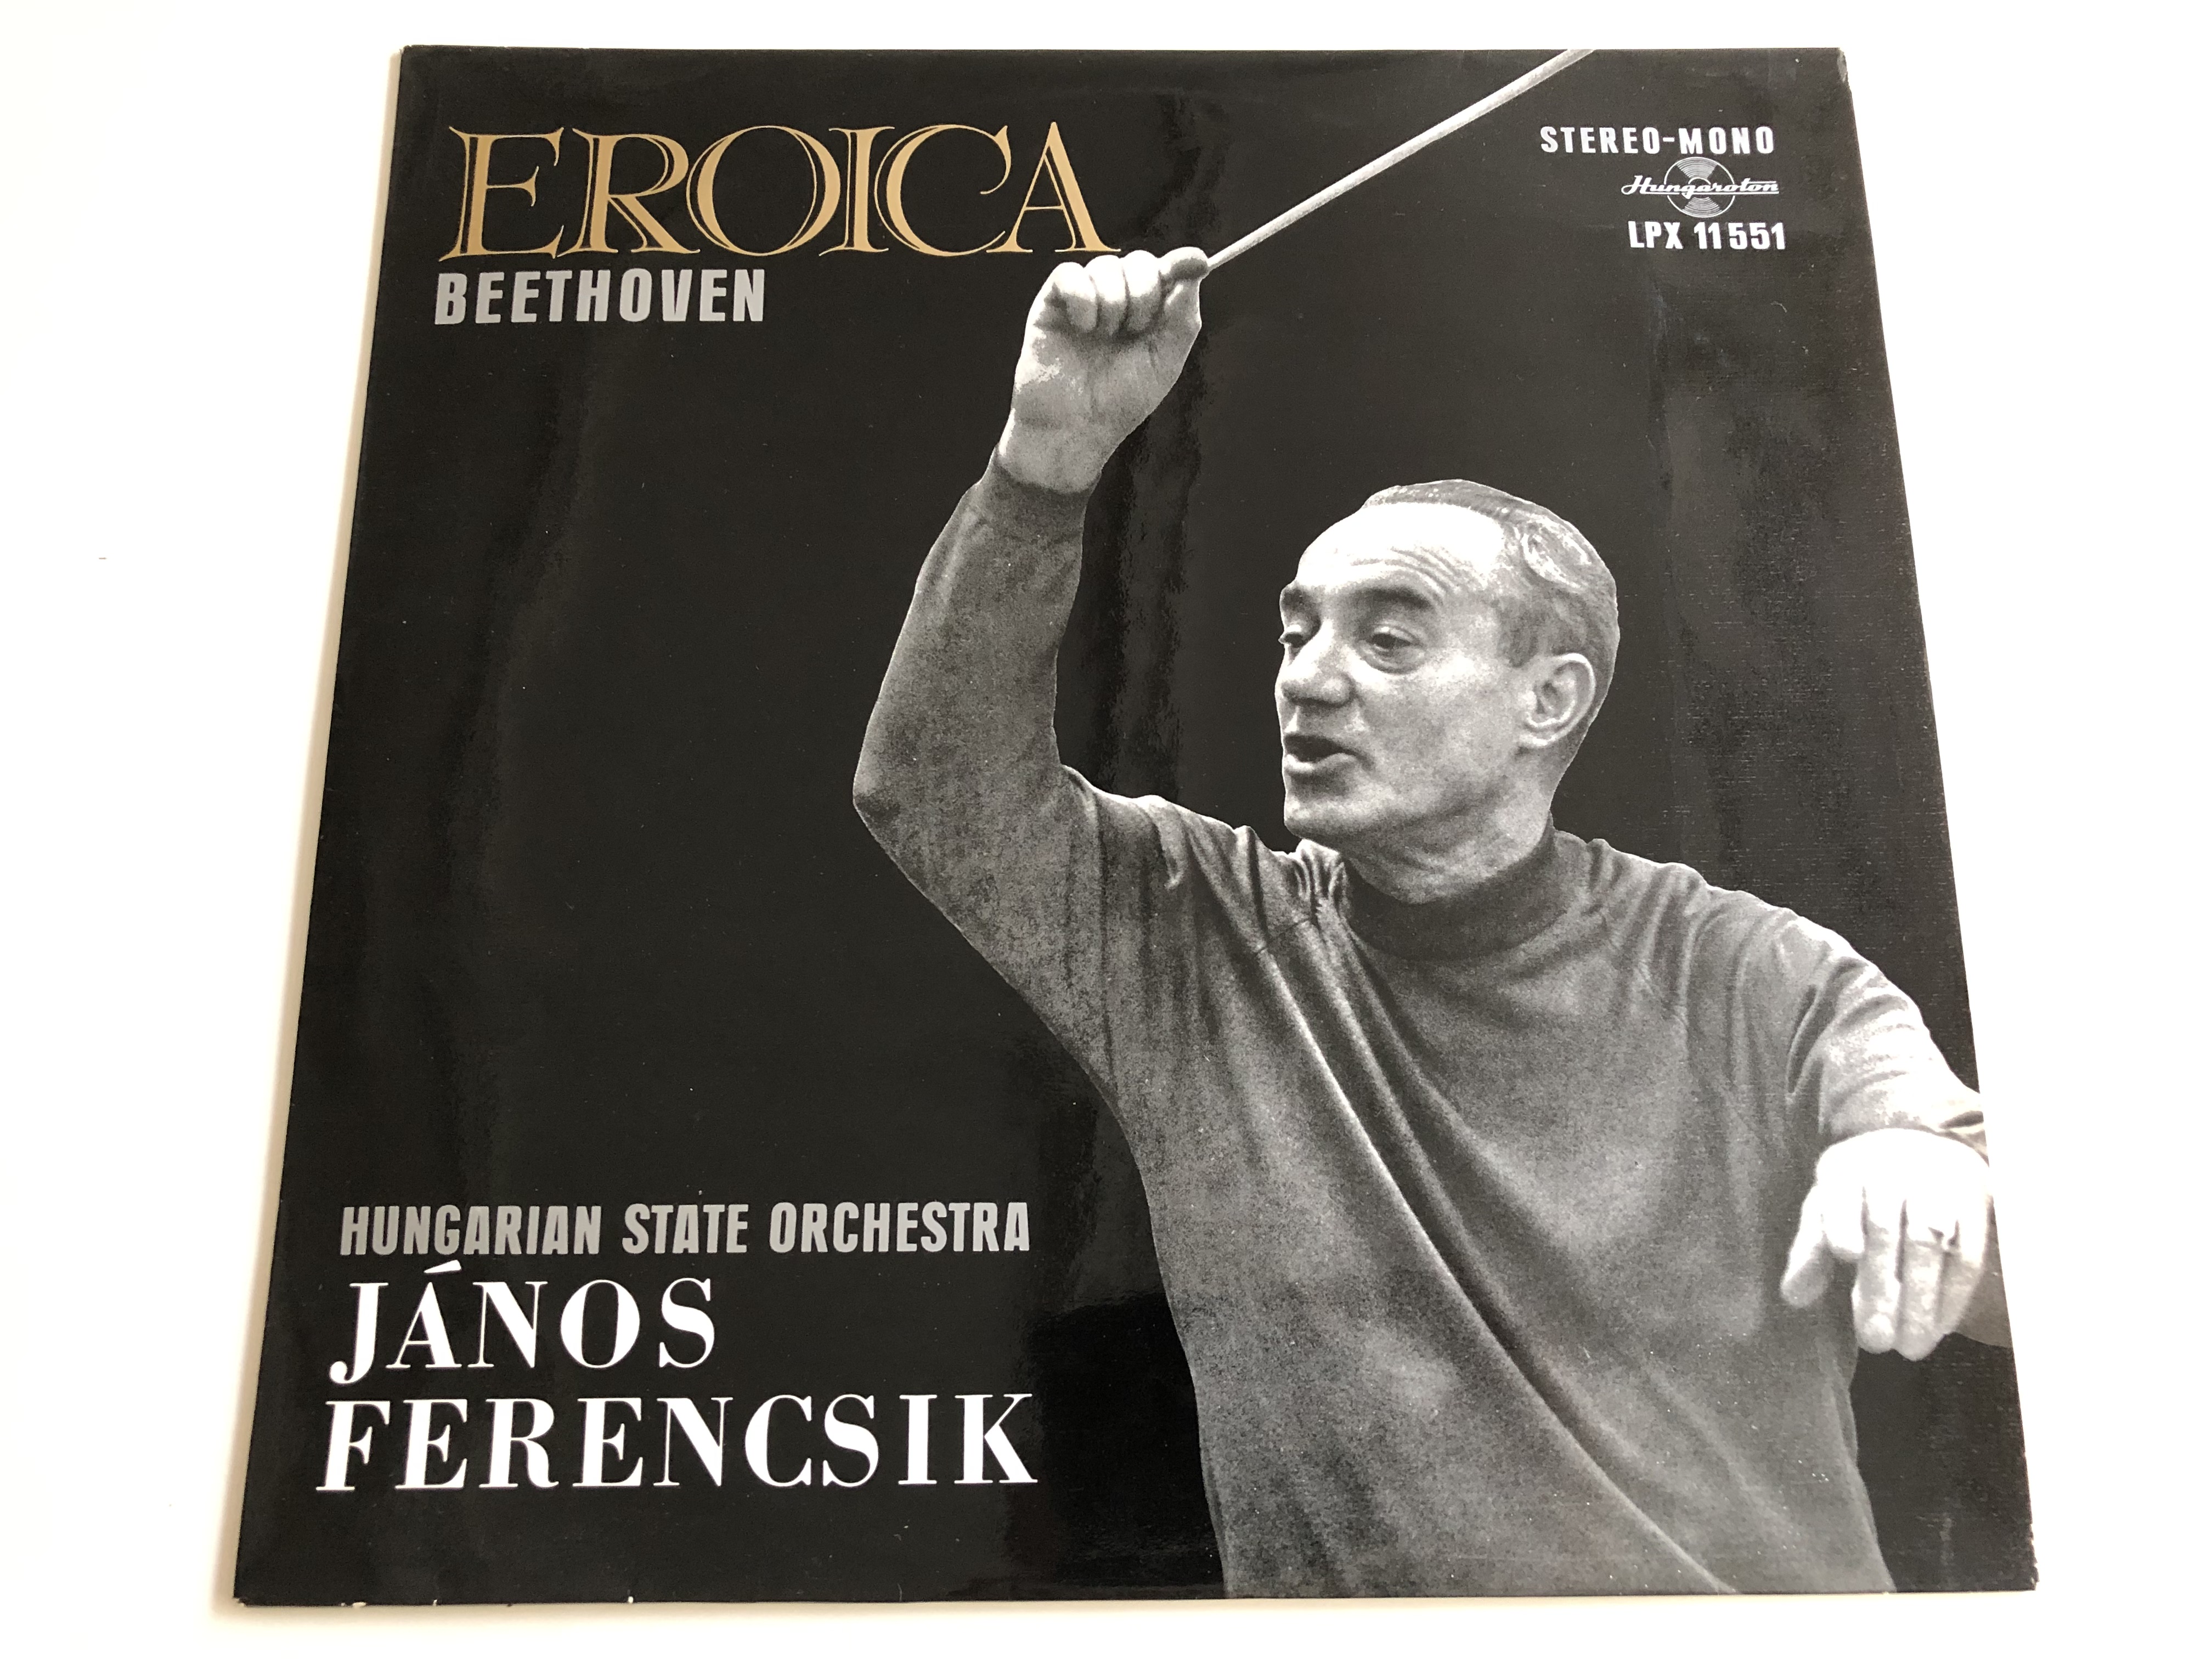 eroica-beethoven-stereo-mono-lp-hungarian-state-orchestra-conducted-by-j-nos-ferencsik-hungaroton-lpx11551-1-.jpg